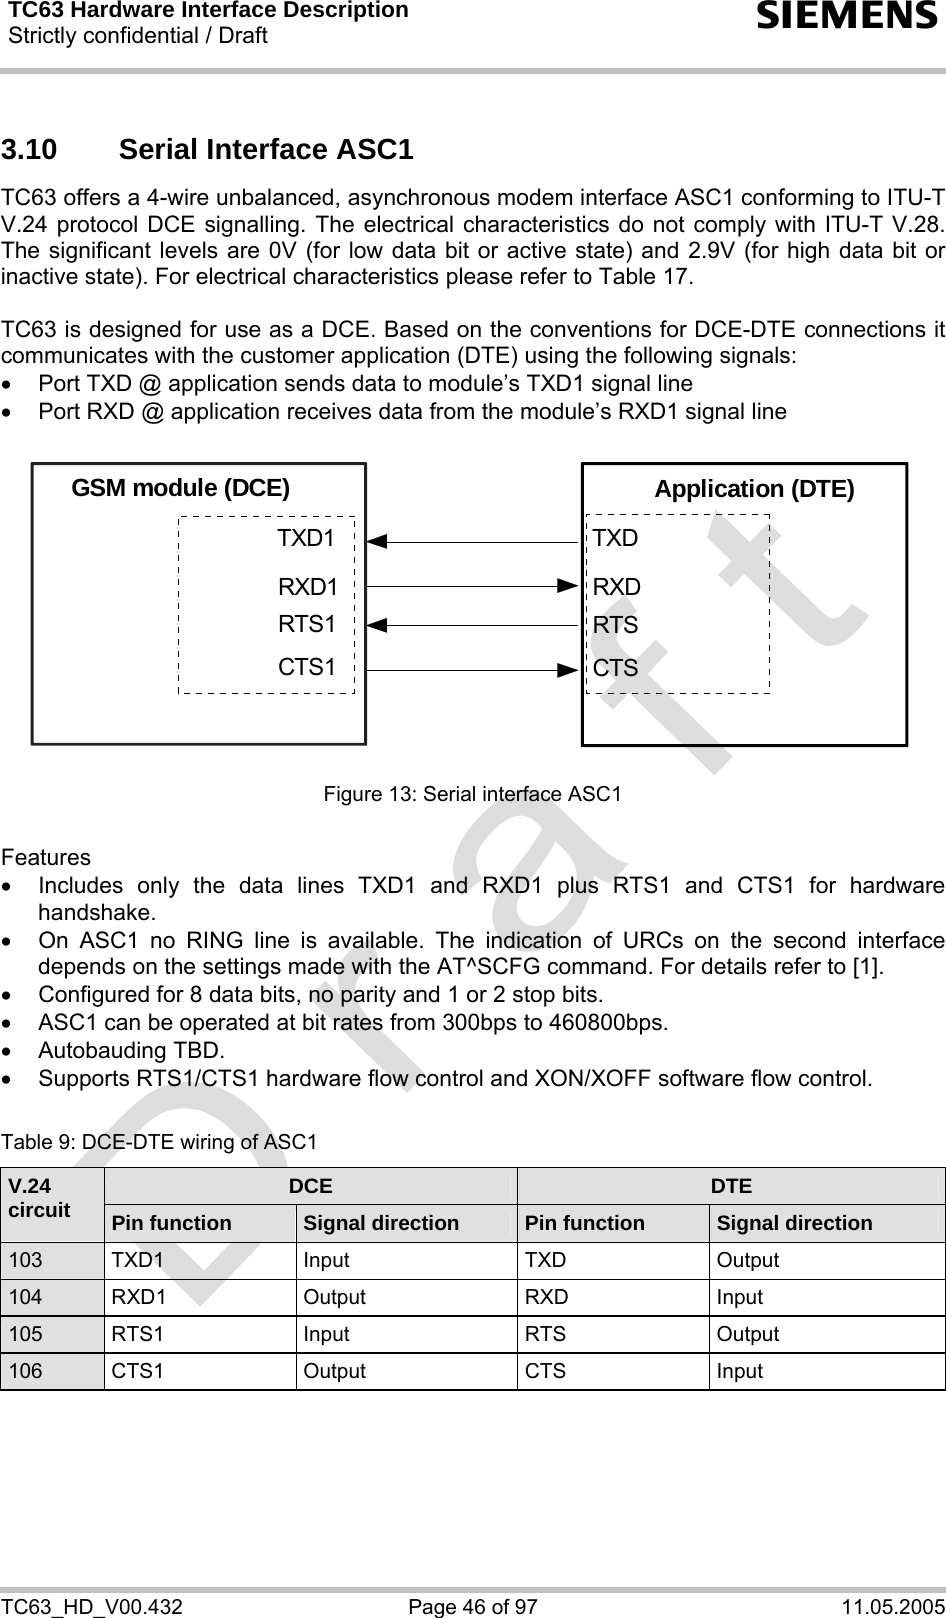 TC63 Hardware Interface Description Strictly confidential / Draft  s TC63_HD_V00.432  Page 46 of 97  11.05.2005 3.10  Serial Interface ASC1 TC63 offers a 4-wire unbalanced, asynchronous modem interface ASC1 conforming to ITU-T V.24 protocol DCE signalling. The electrical characteristics do not comply with ITU-T V.28. The significant levels are 0V (for low data bit or active state) and 2.9V (for high data bit or inactive state). For electrical characteristics please refer to Table 17.  TC63 is designed for use as a DCE. Based on the conventions for DCE-DTE connections it communicates with the customer application (DTE) using the following signals: •  Port TXD @ application sends data to module’s TXD1 signal line •  Port RXD @ application receives data from the module’s RXD1 signal line  GSM module (DCE) Application (DTE)TXDRXDRTSCTSTXD1RXD1RTS1CTS1 Figure 13: Serial interface ASC1  Features •  Includes only the data lines TXD1 and RXD1 plus RTS1 and CTS1 for hardware handshake.  •  On ASC1 no RING line is available. The indication of URCs on the second interface depends on the settings made with the AT^SCFG command. For details refer to [1]. •  Configured for 8 data bits, no parity and 1 or 2 stop bits. •  ASC1 can be operated at bit rates from 300bps to 460800bps.  • Autobauding TBD. •  Supports RTS1/CTS1 hardware flow control and XON/XOFF software flow control.  Table 9: DCE-DTE wiring of ASC1 DCE  DTE V.24 circuit  Pin function  Signal direction  Pin function  Signal direction 103 TXD1  Input  TXD  Output 104 RXD1  Output  RXD  Input 105 RTS1  Input  RTS  Output 106 CTS1  Output  CTS  Input   